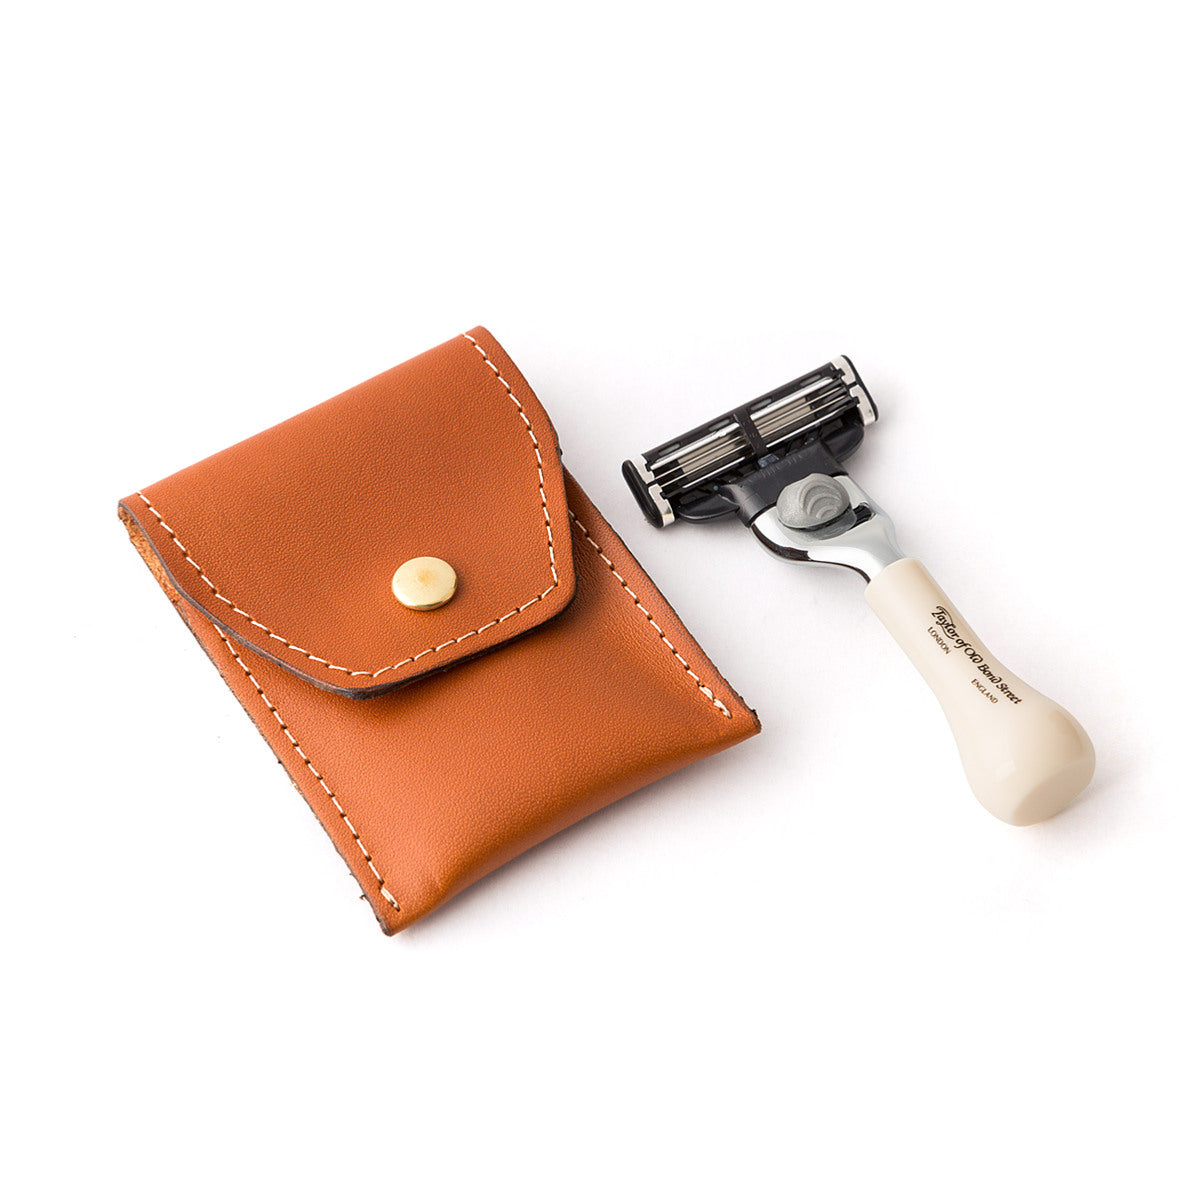 Taylor of Old Bond Street Mini Imitation Ivory Travel Mach3 Razor in Leather pouch